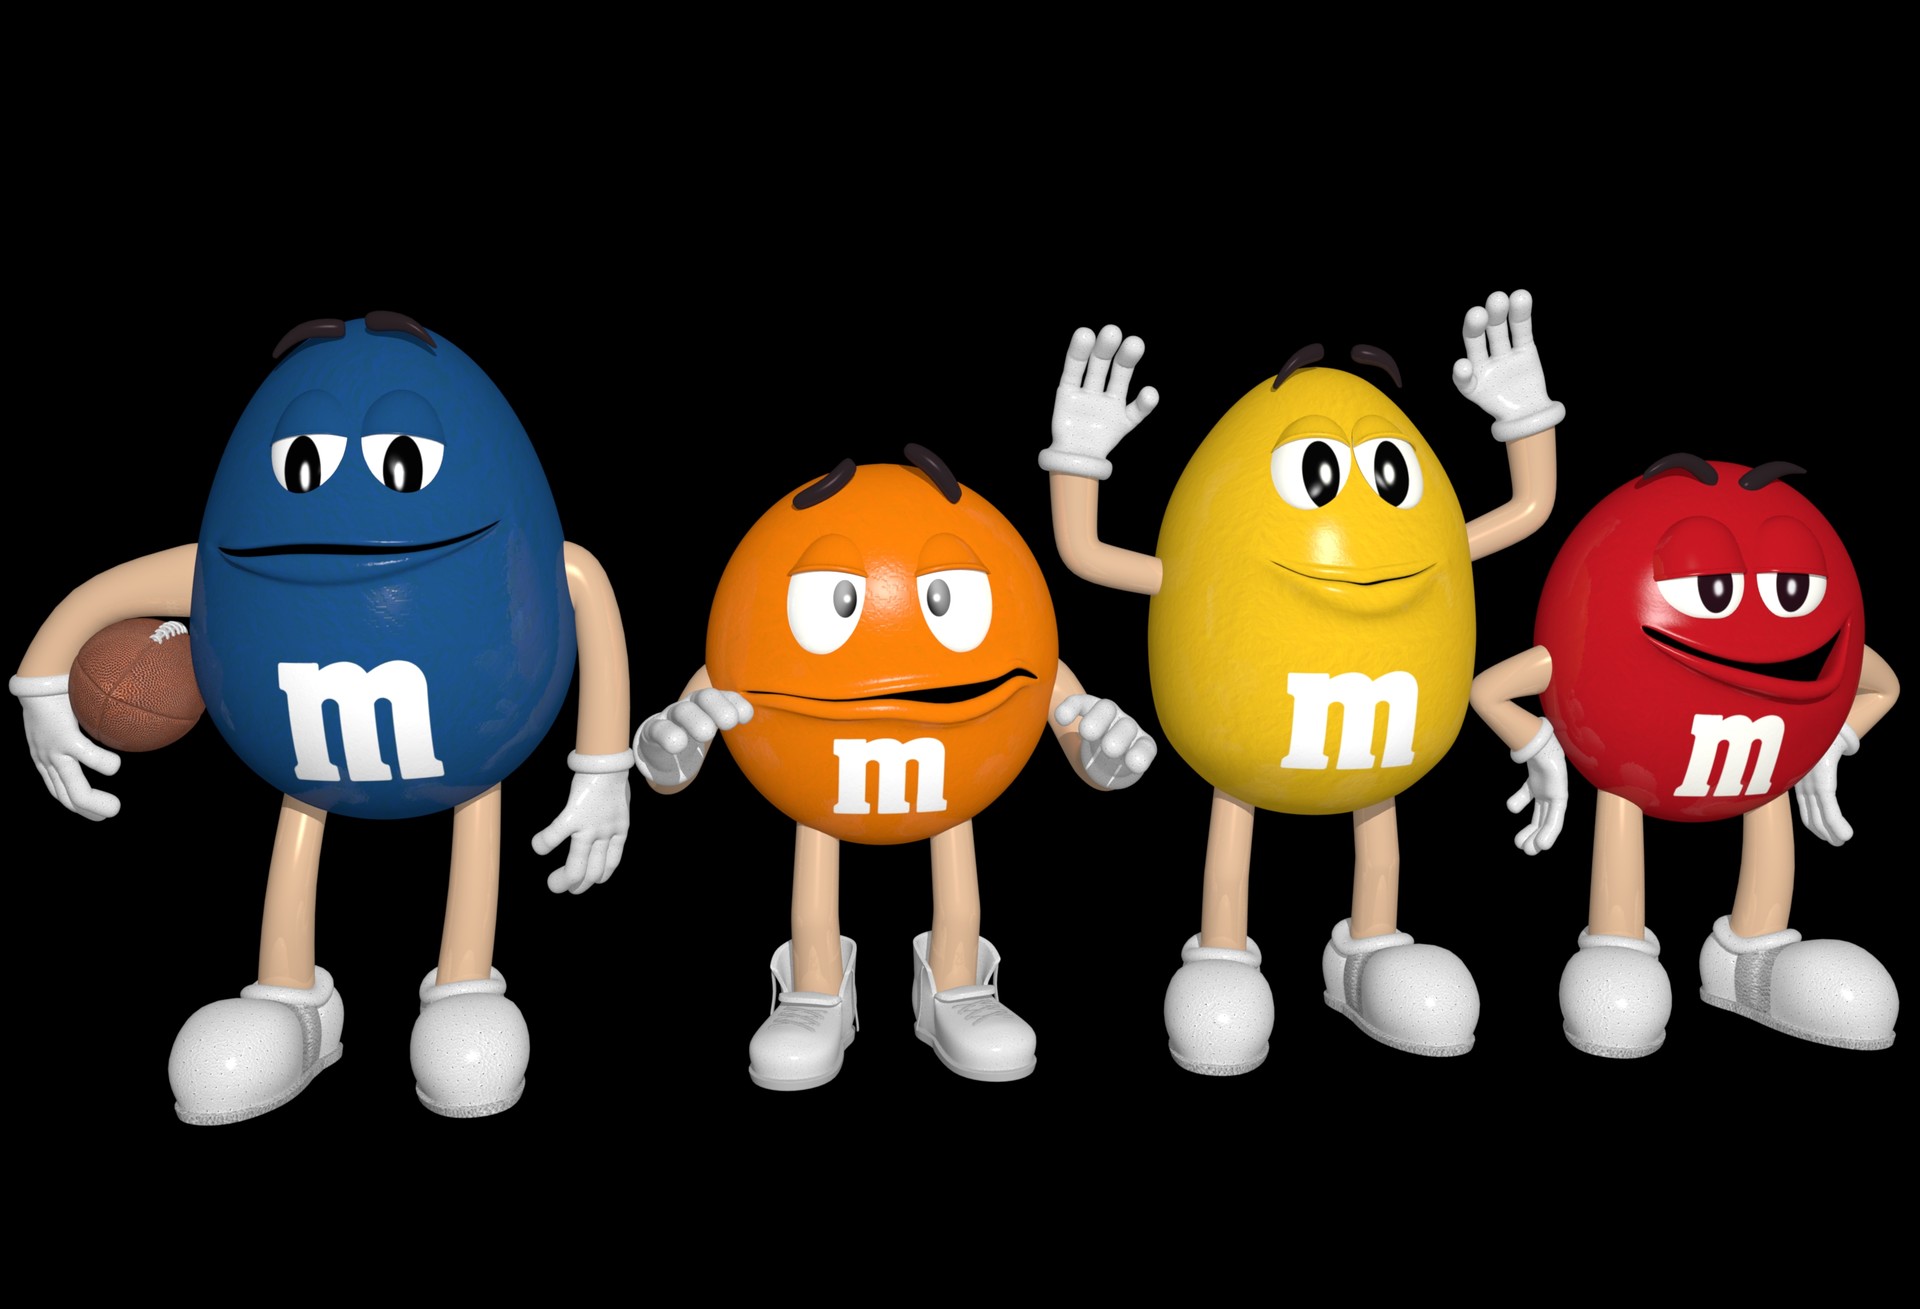 ArtStation - Red m&m character